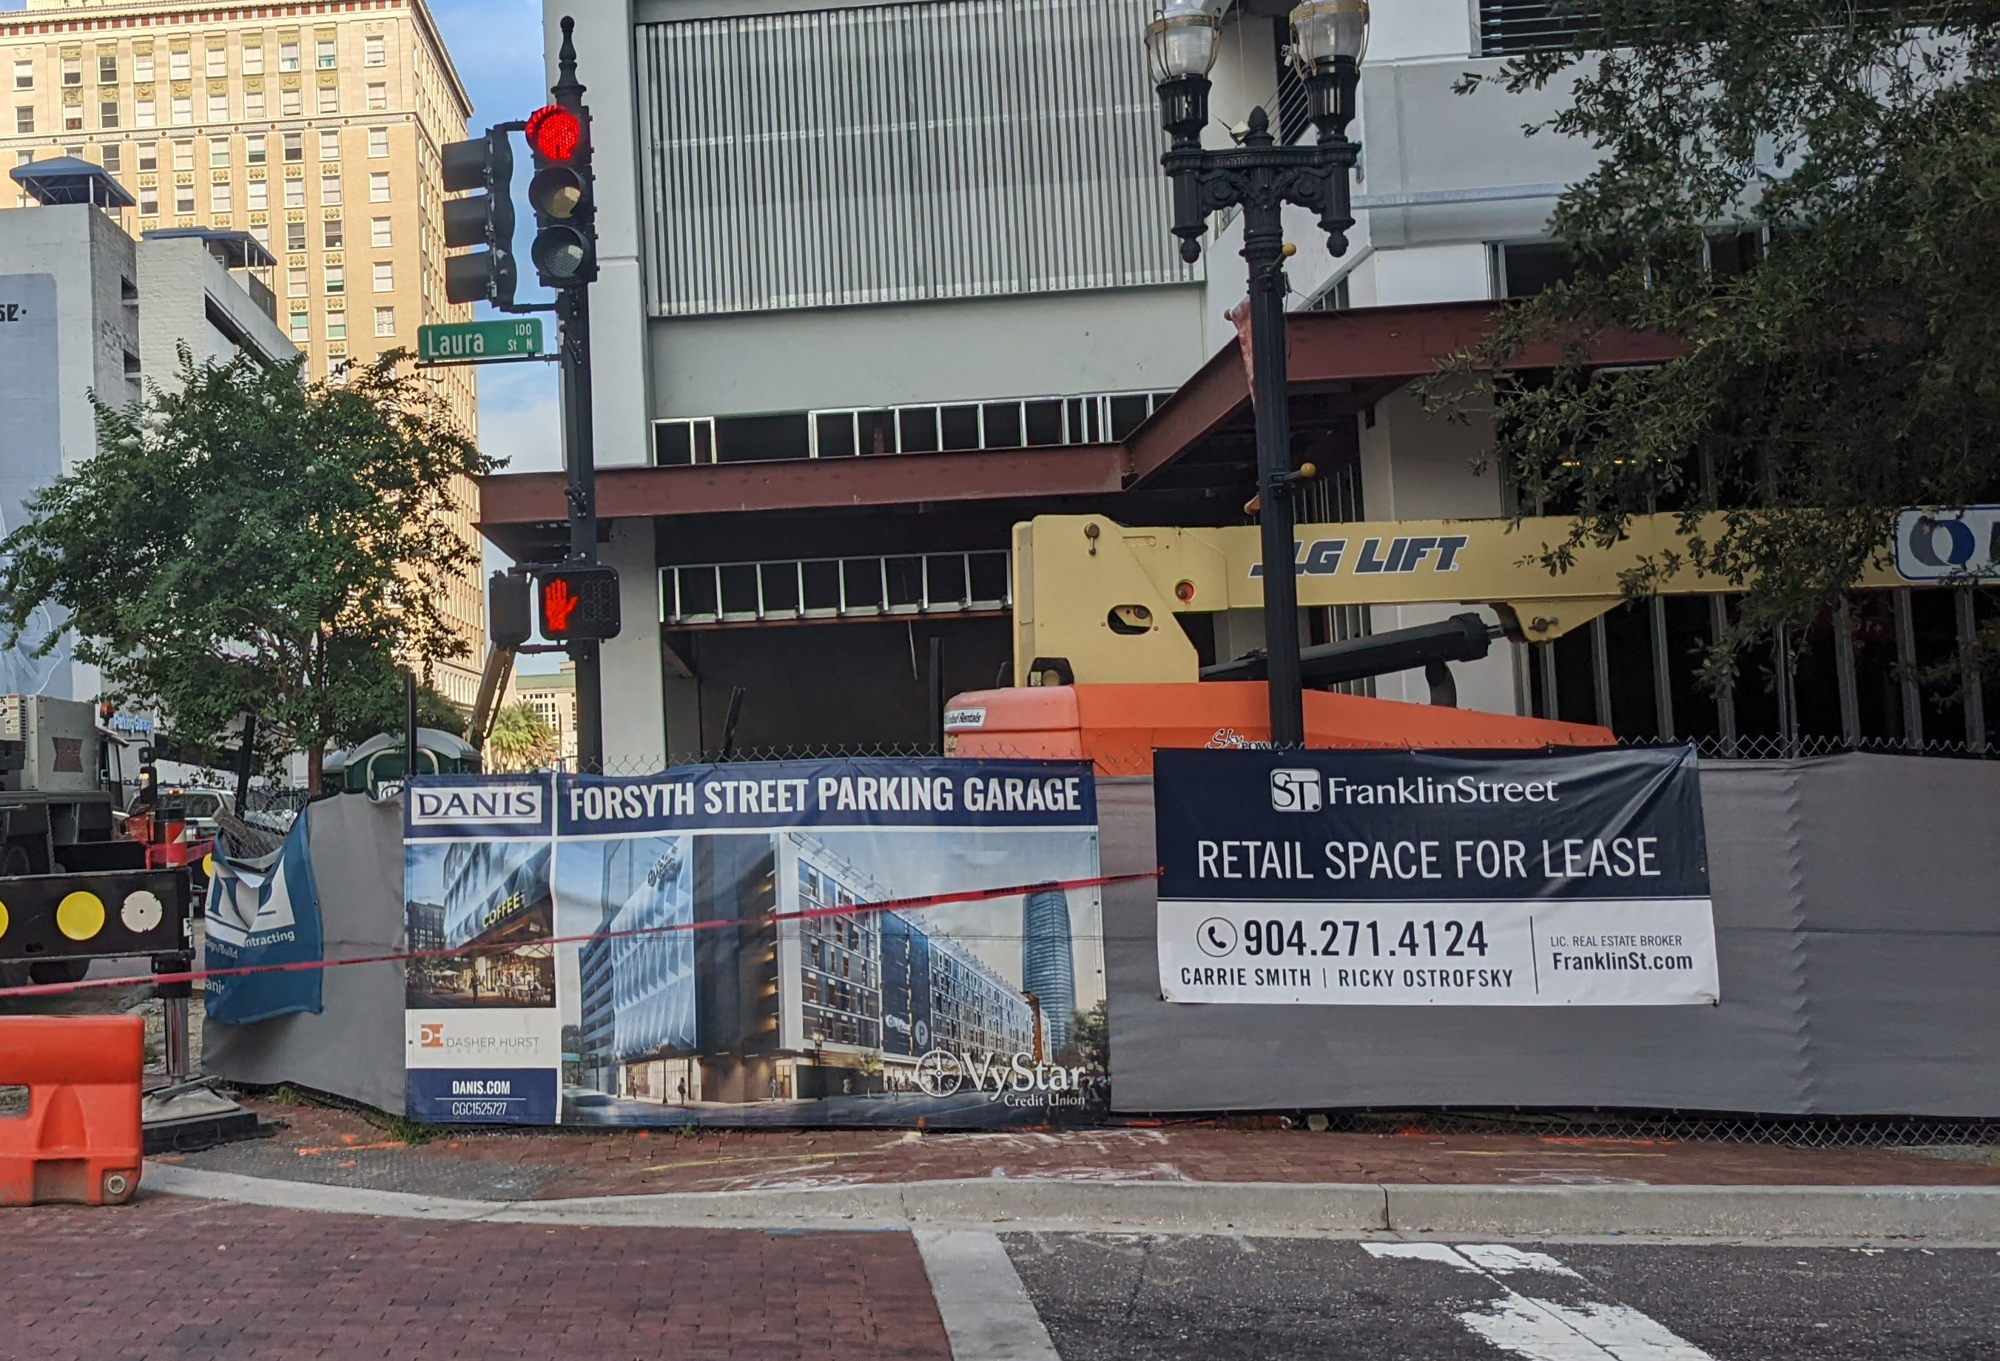 Franklin Street is seeking tenants for the VyStar parking garage across the street from the Bank of America Tower.